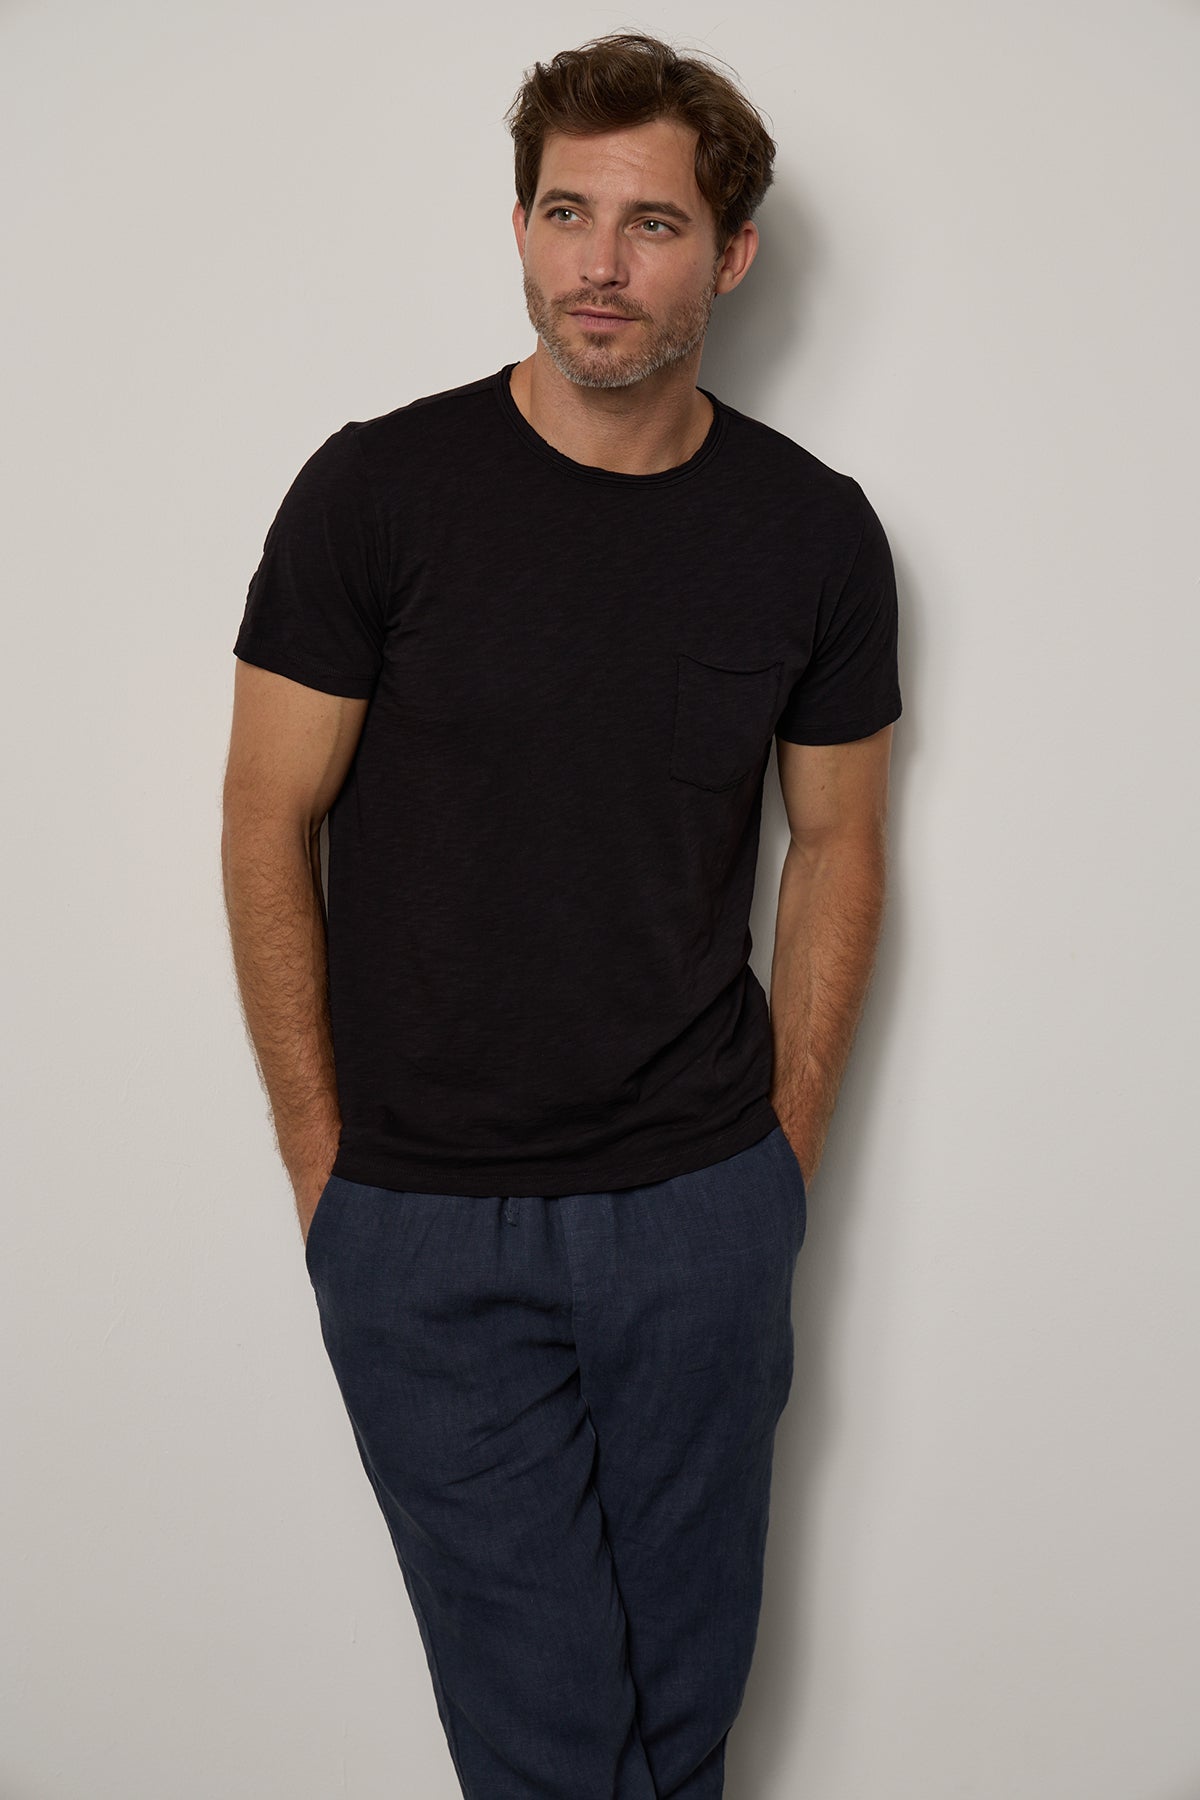 Man in a black textured cotton slub CHAD TEE by Velvet by Graham & Spencer and navy pants standing against a neutral background, looking to his left with a subtle smile.-26098082414785